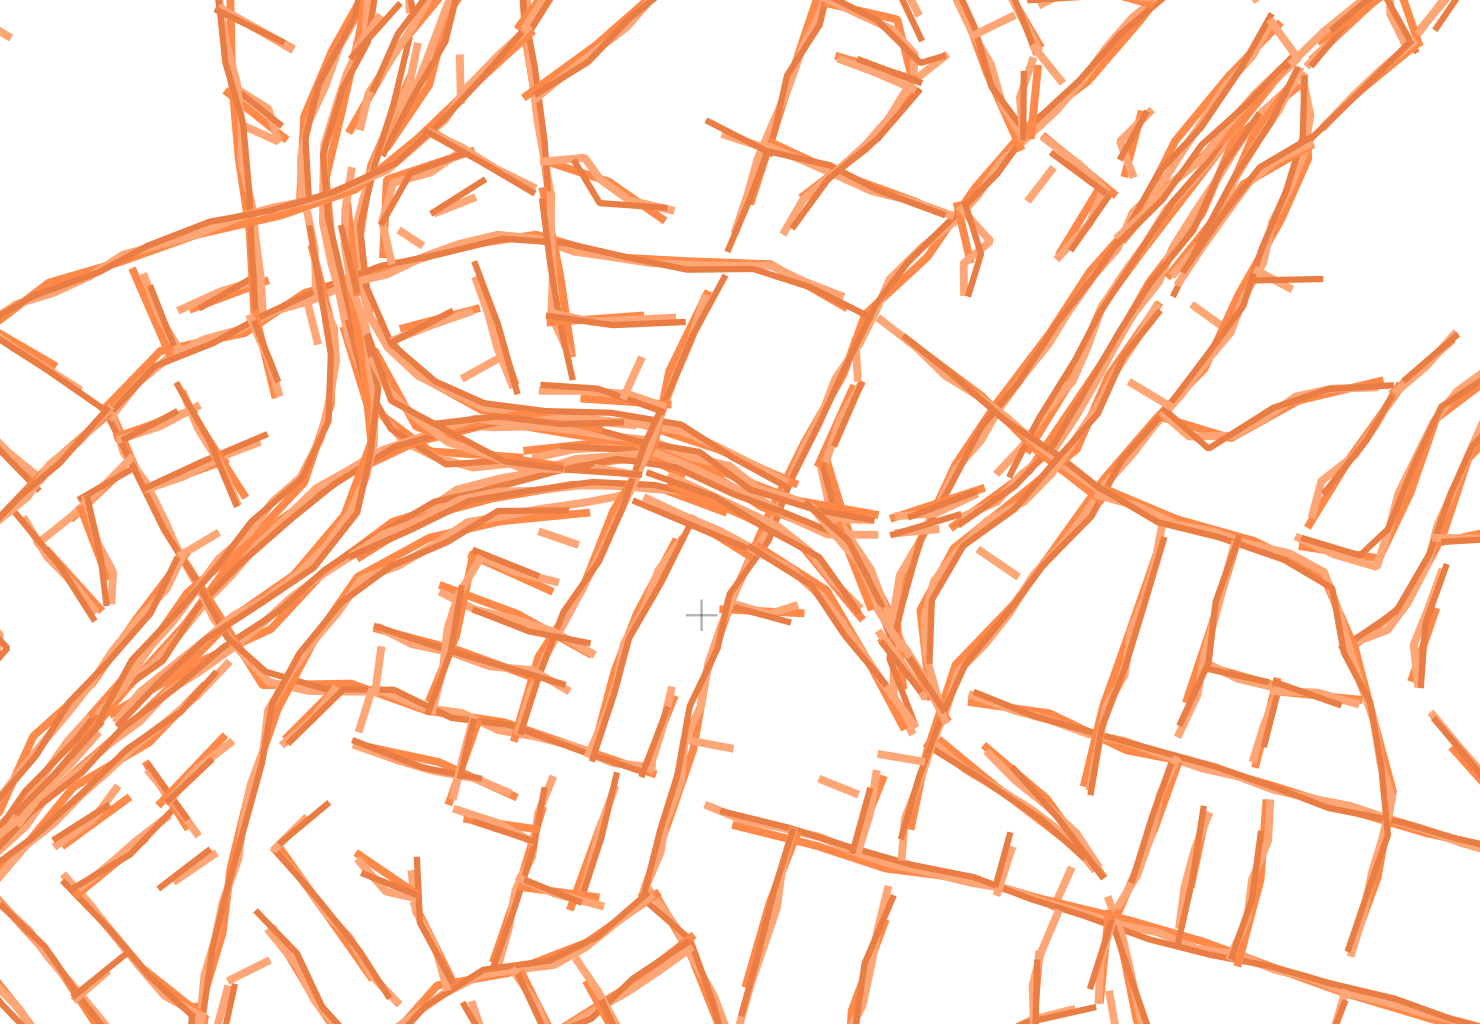 A real roads dataset with a sketch effect